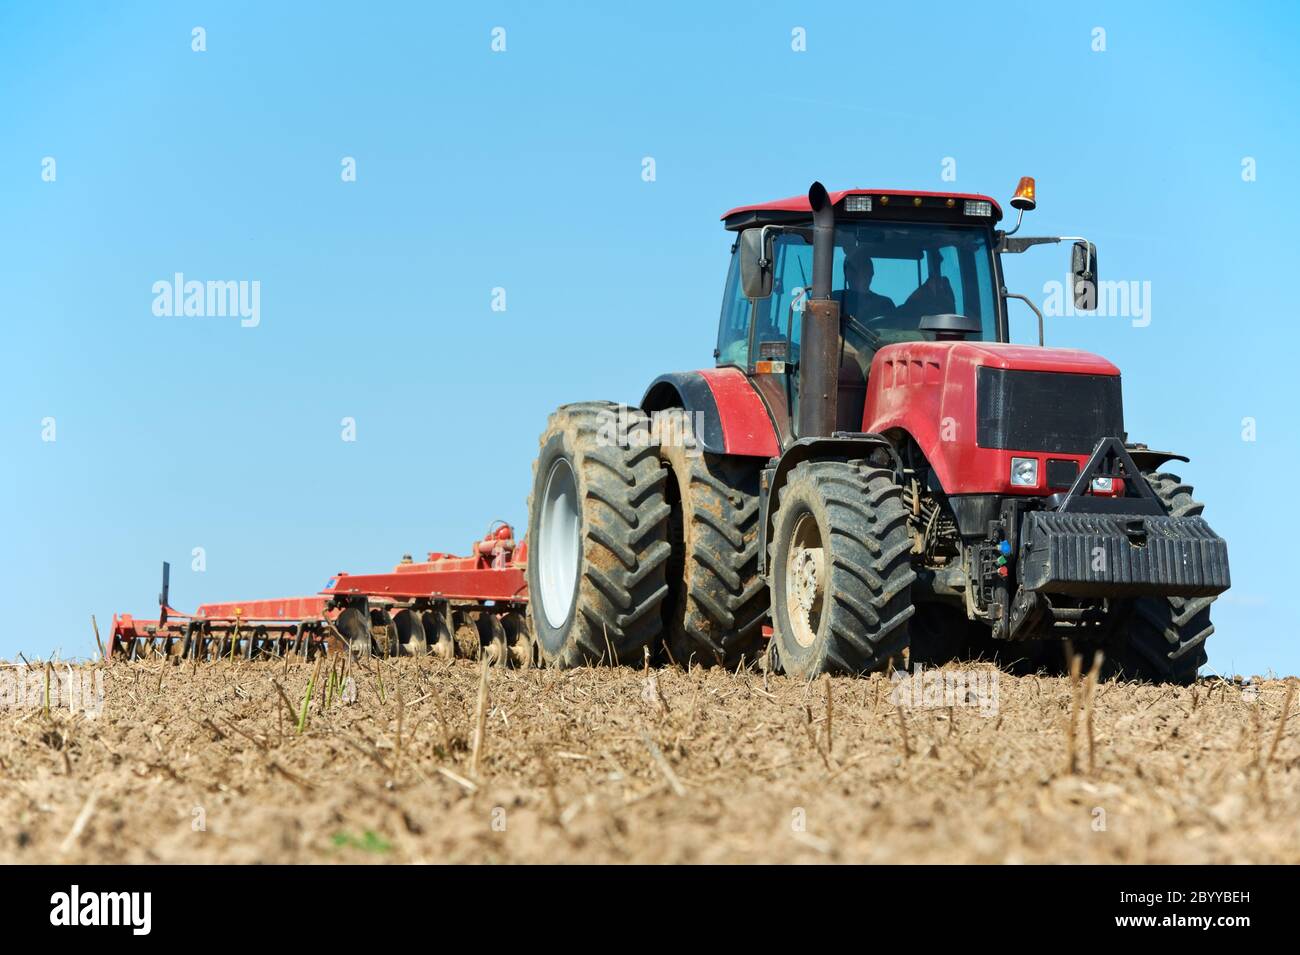 Ploughing tractor at field cultivation work Stock Photo